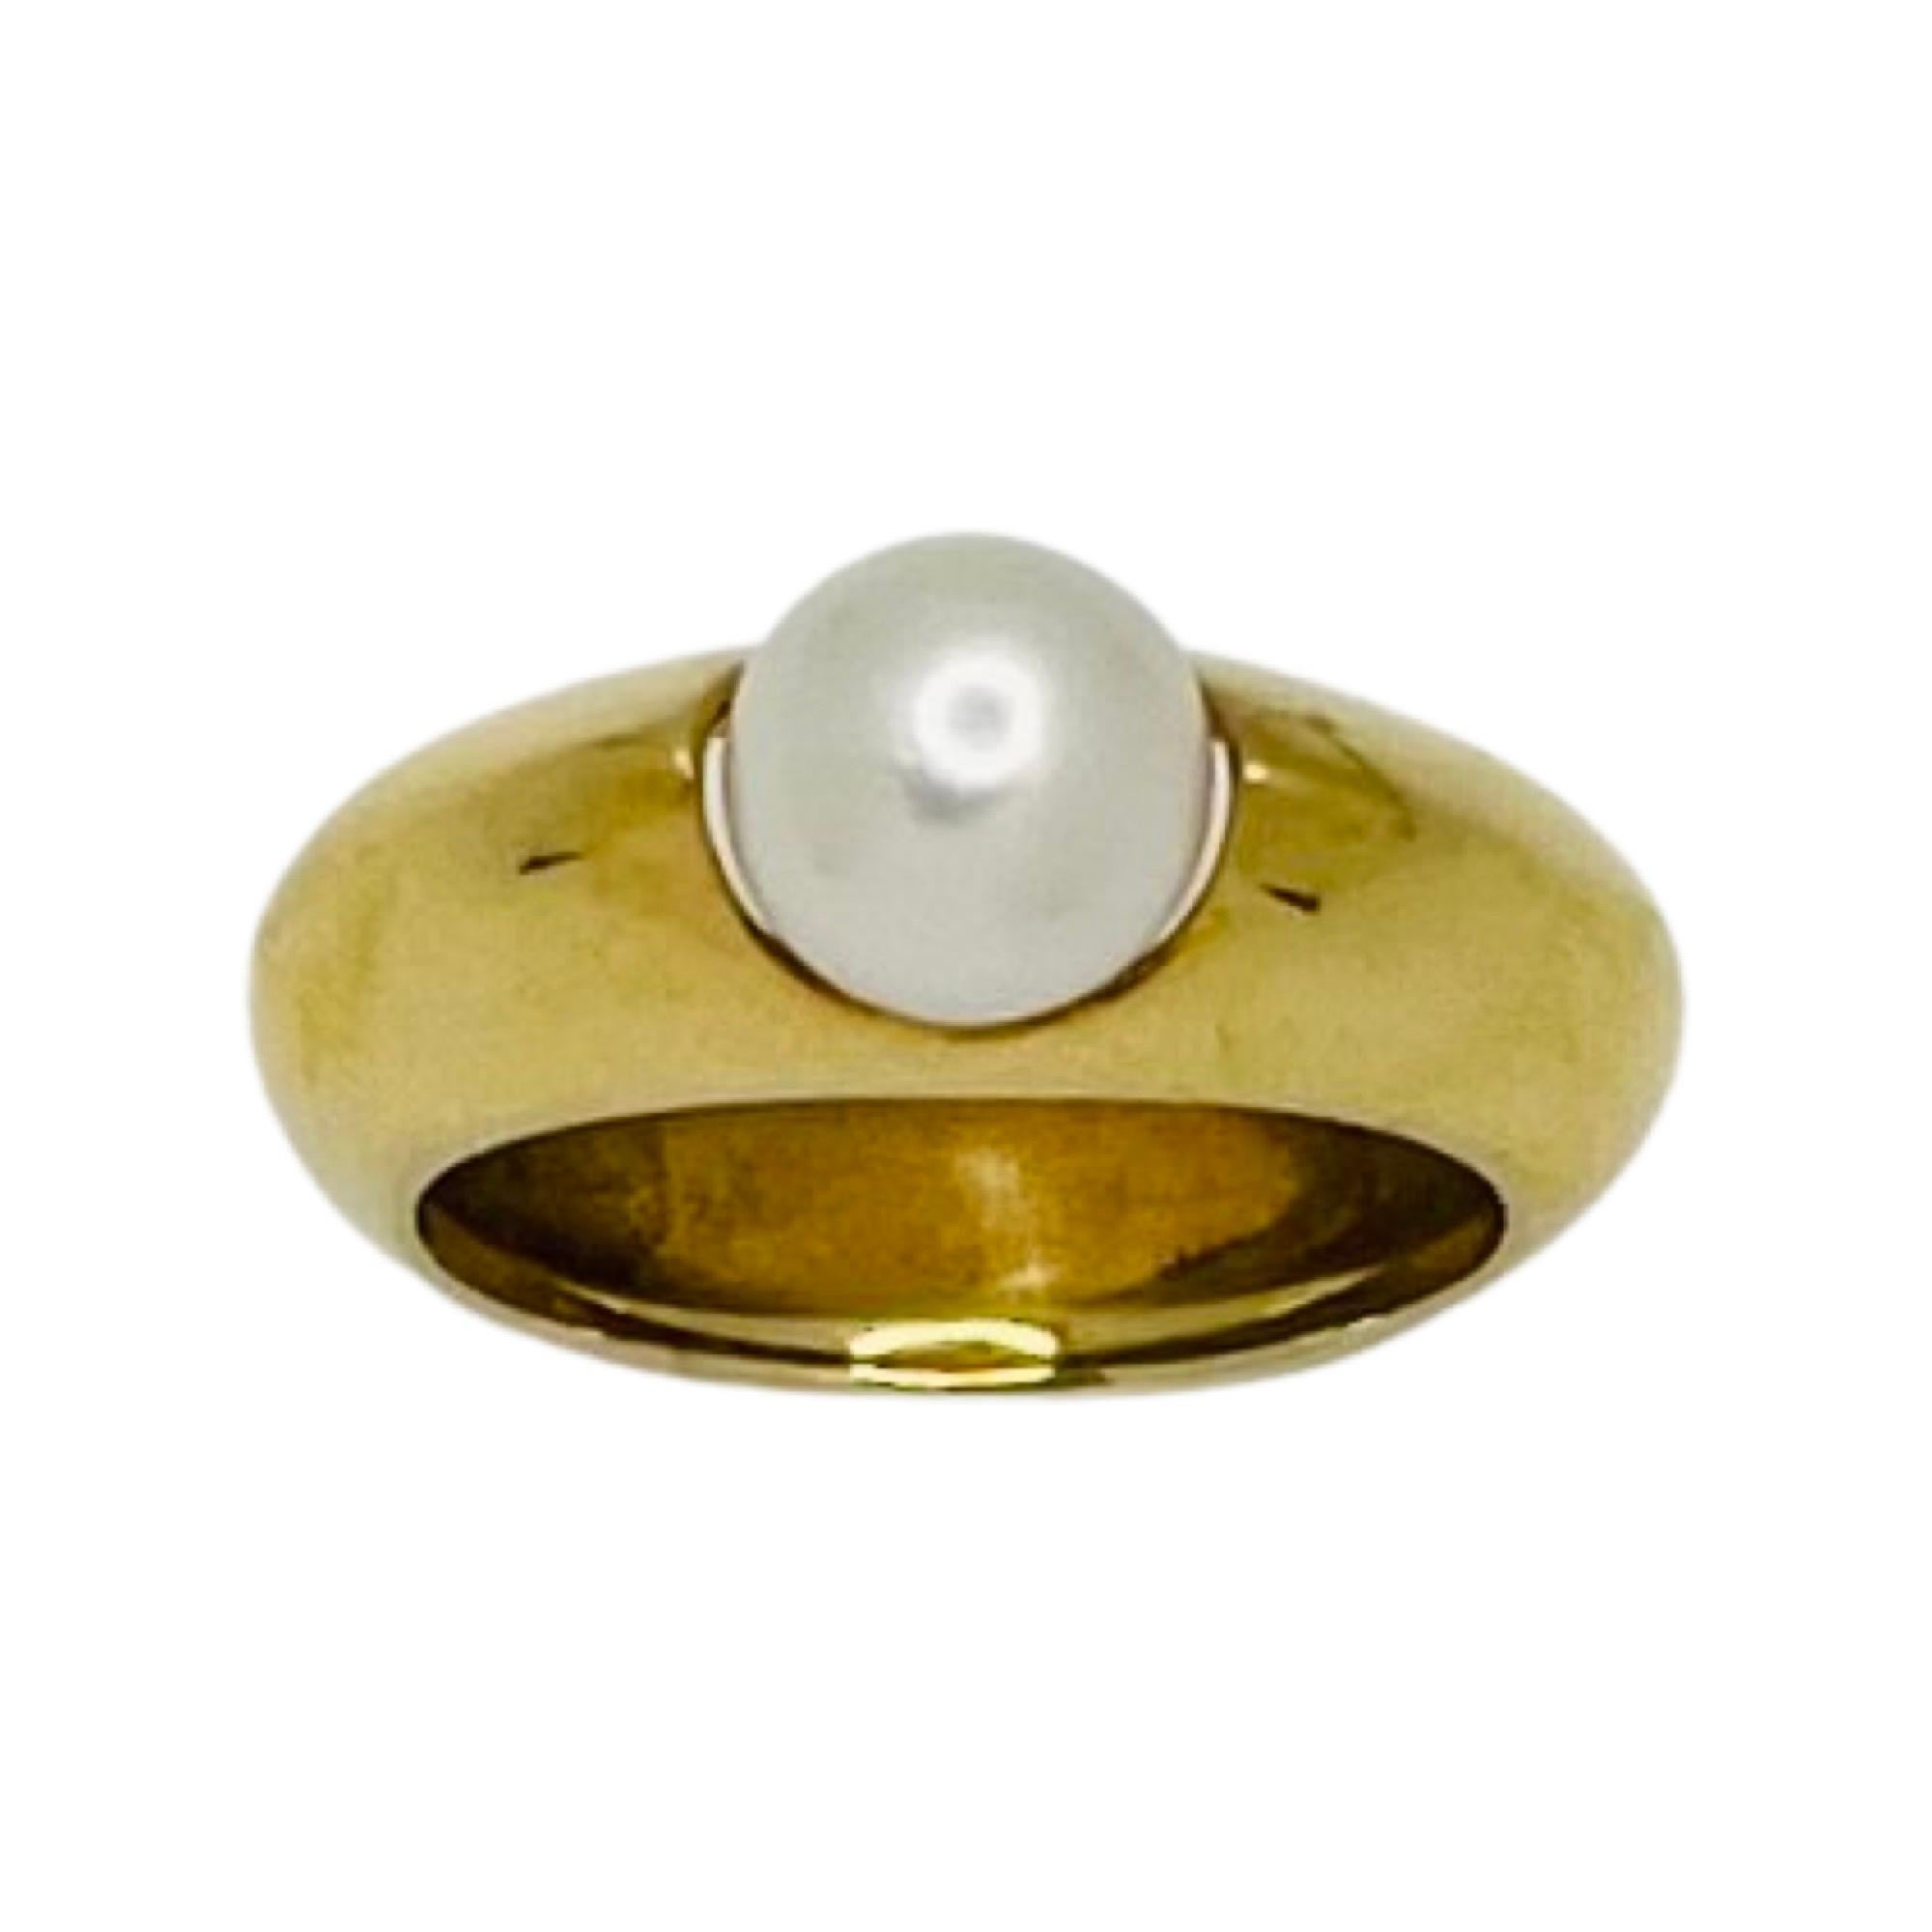 William Richey 18K Yellow Cultured Japanese Akoya Pearl Ring. The Akoya pearl is 7.5 mm.  The natural color pearl is round with very slight blemishes.  It has a high luster and a rose overtone. The shank is 7.6 mm at the top and tapers to 7.0 mm at